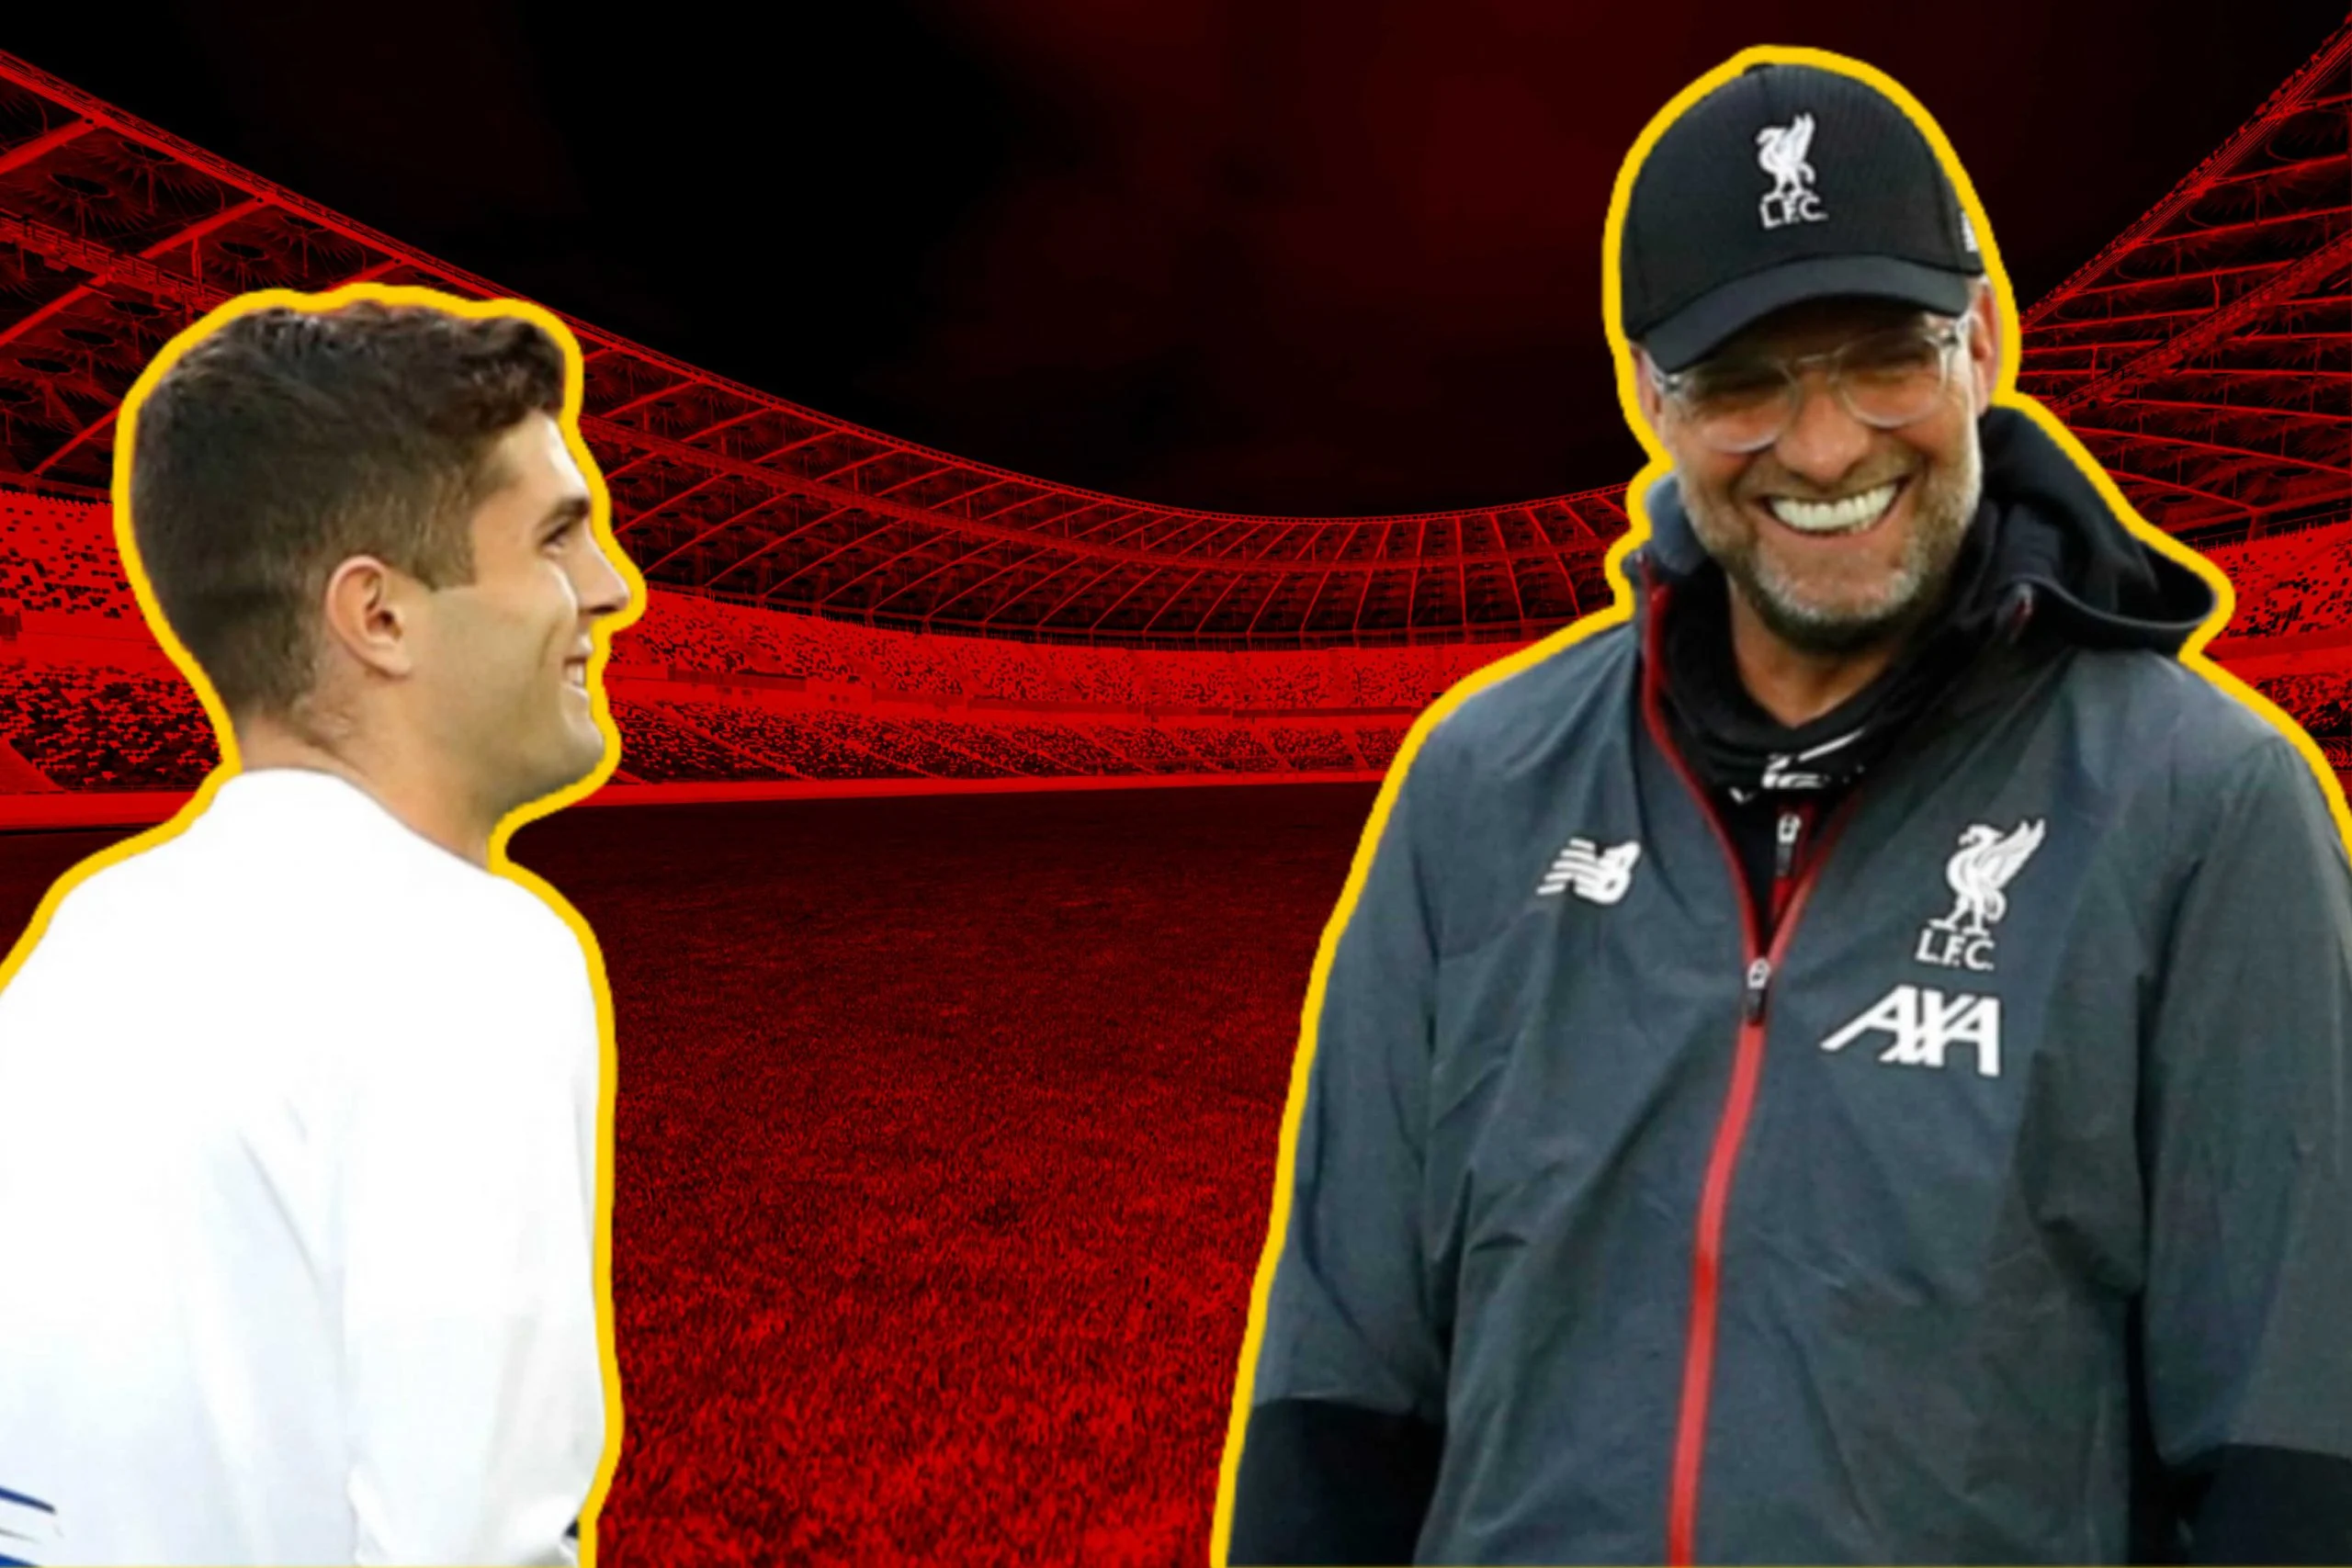 Christian Pulisic and Jurgen Klopp hanging out together before Chelsea v Liverpool match